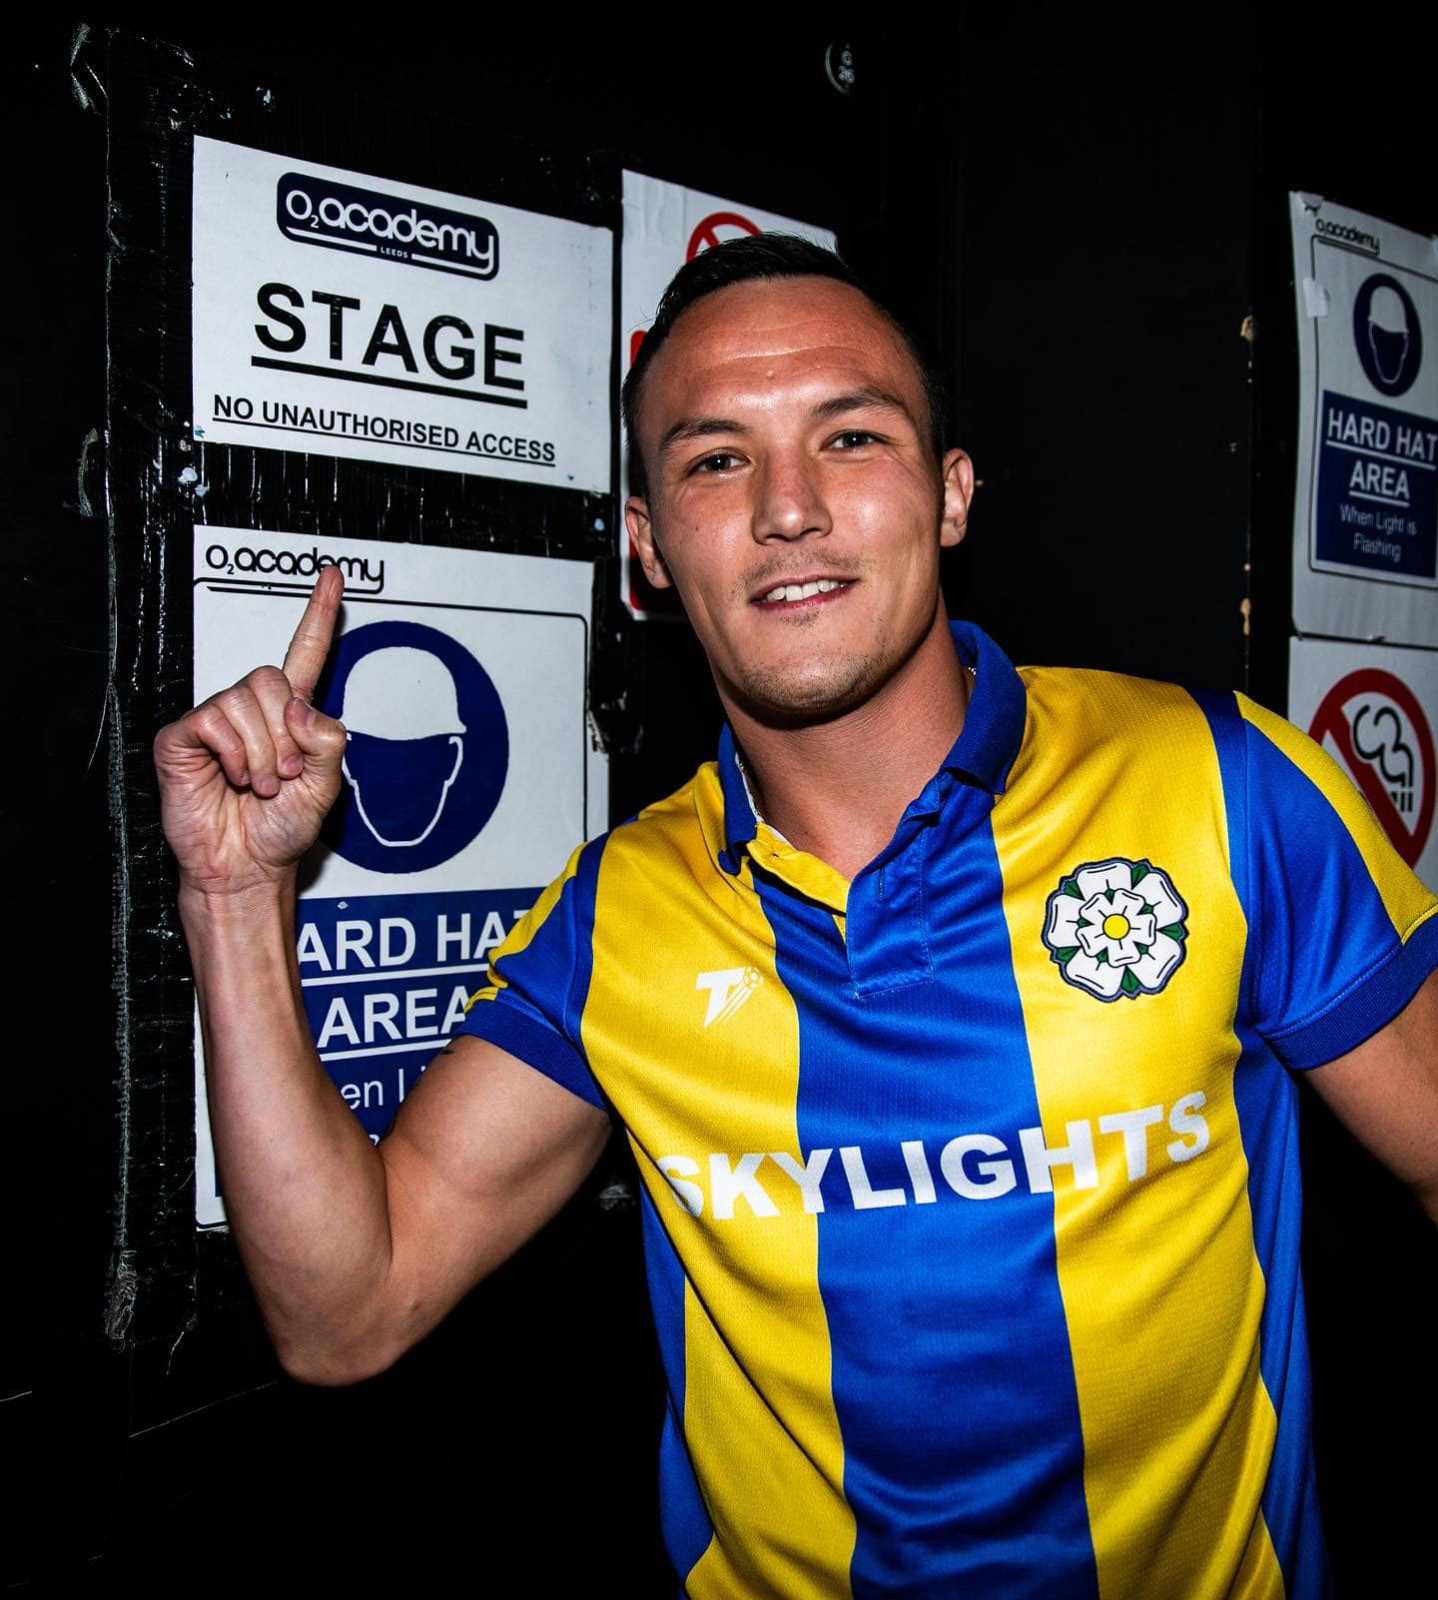 Boxer Josh Warrington wearing a shirt made by The Terrace for the band Skylights, inspired by a past Leeds United shirt.